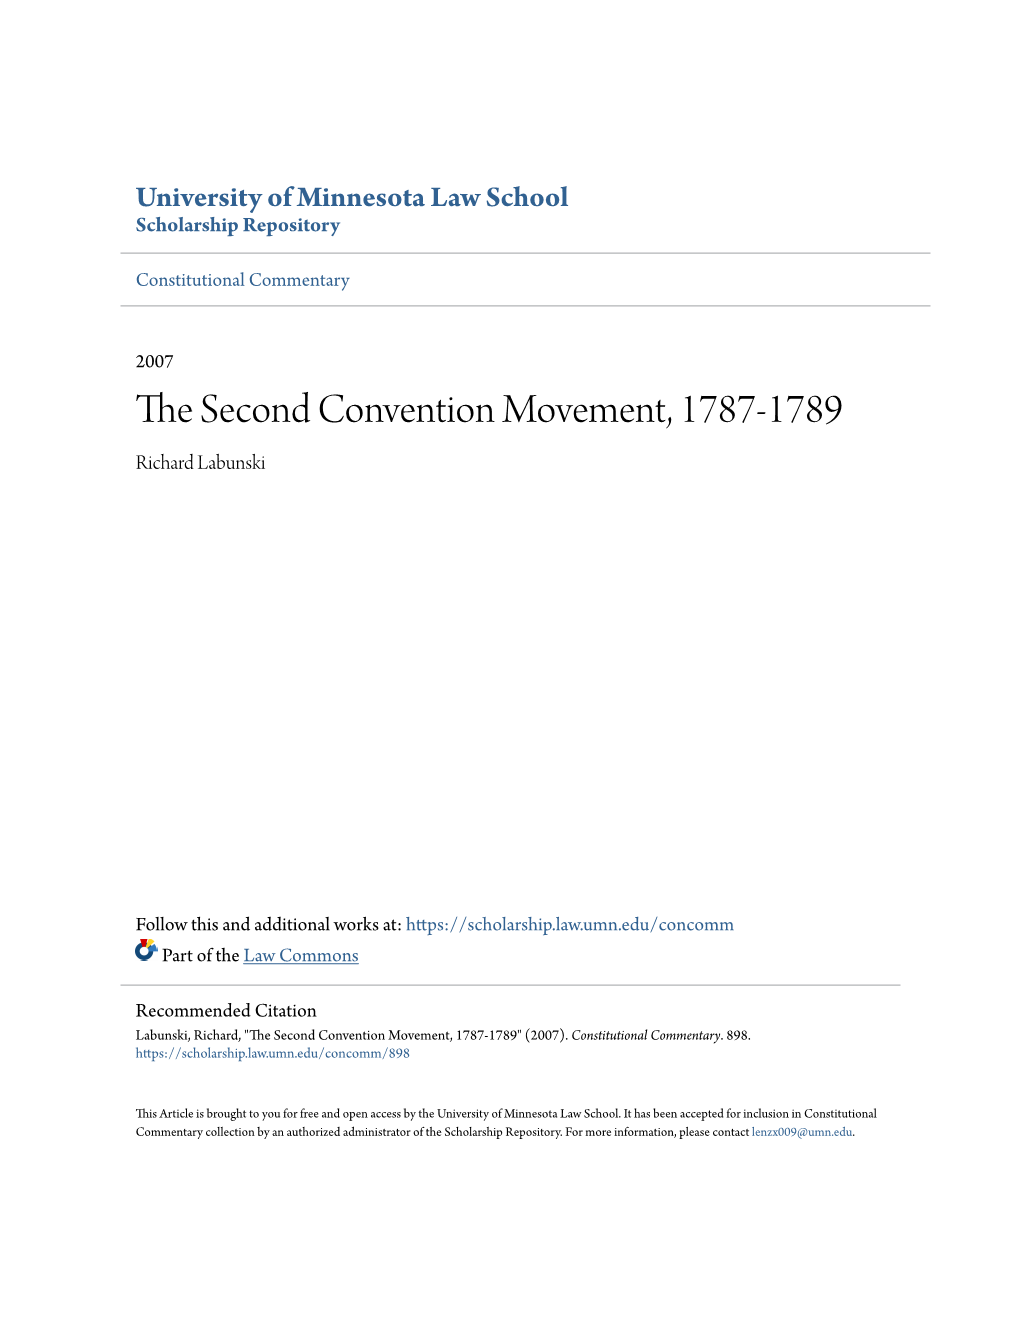 The Second Convention Movement, 1787-1789